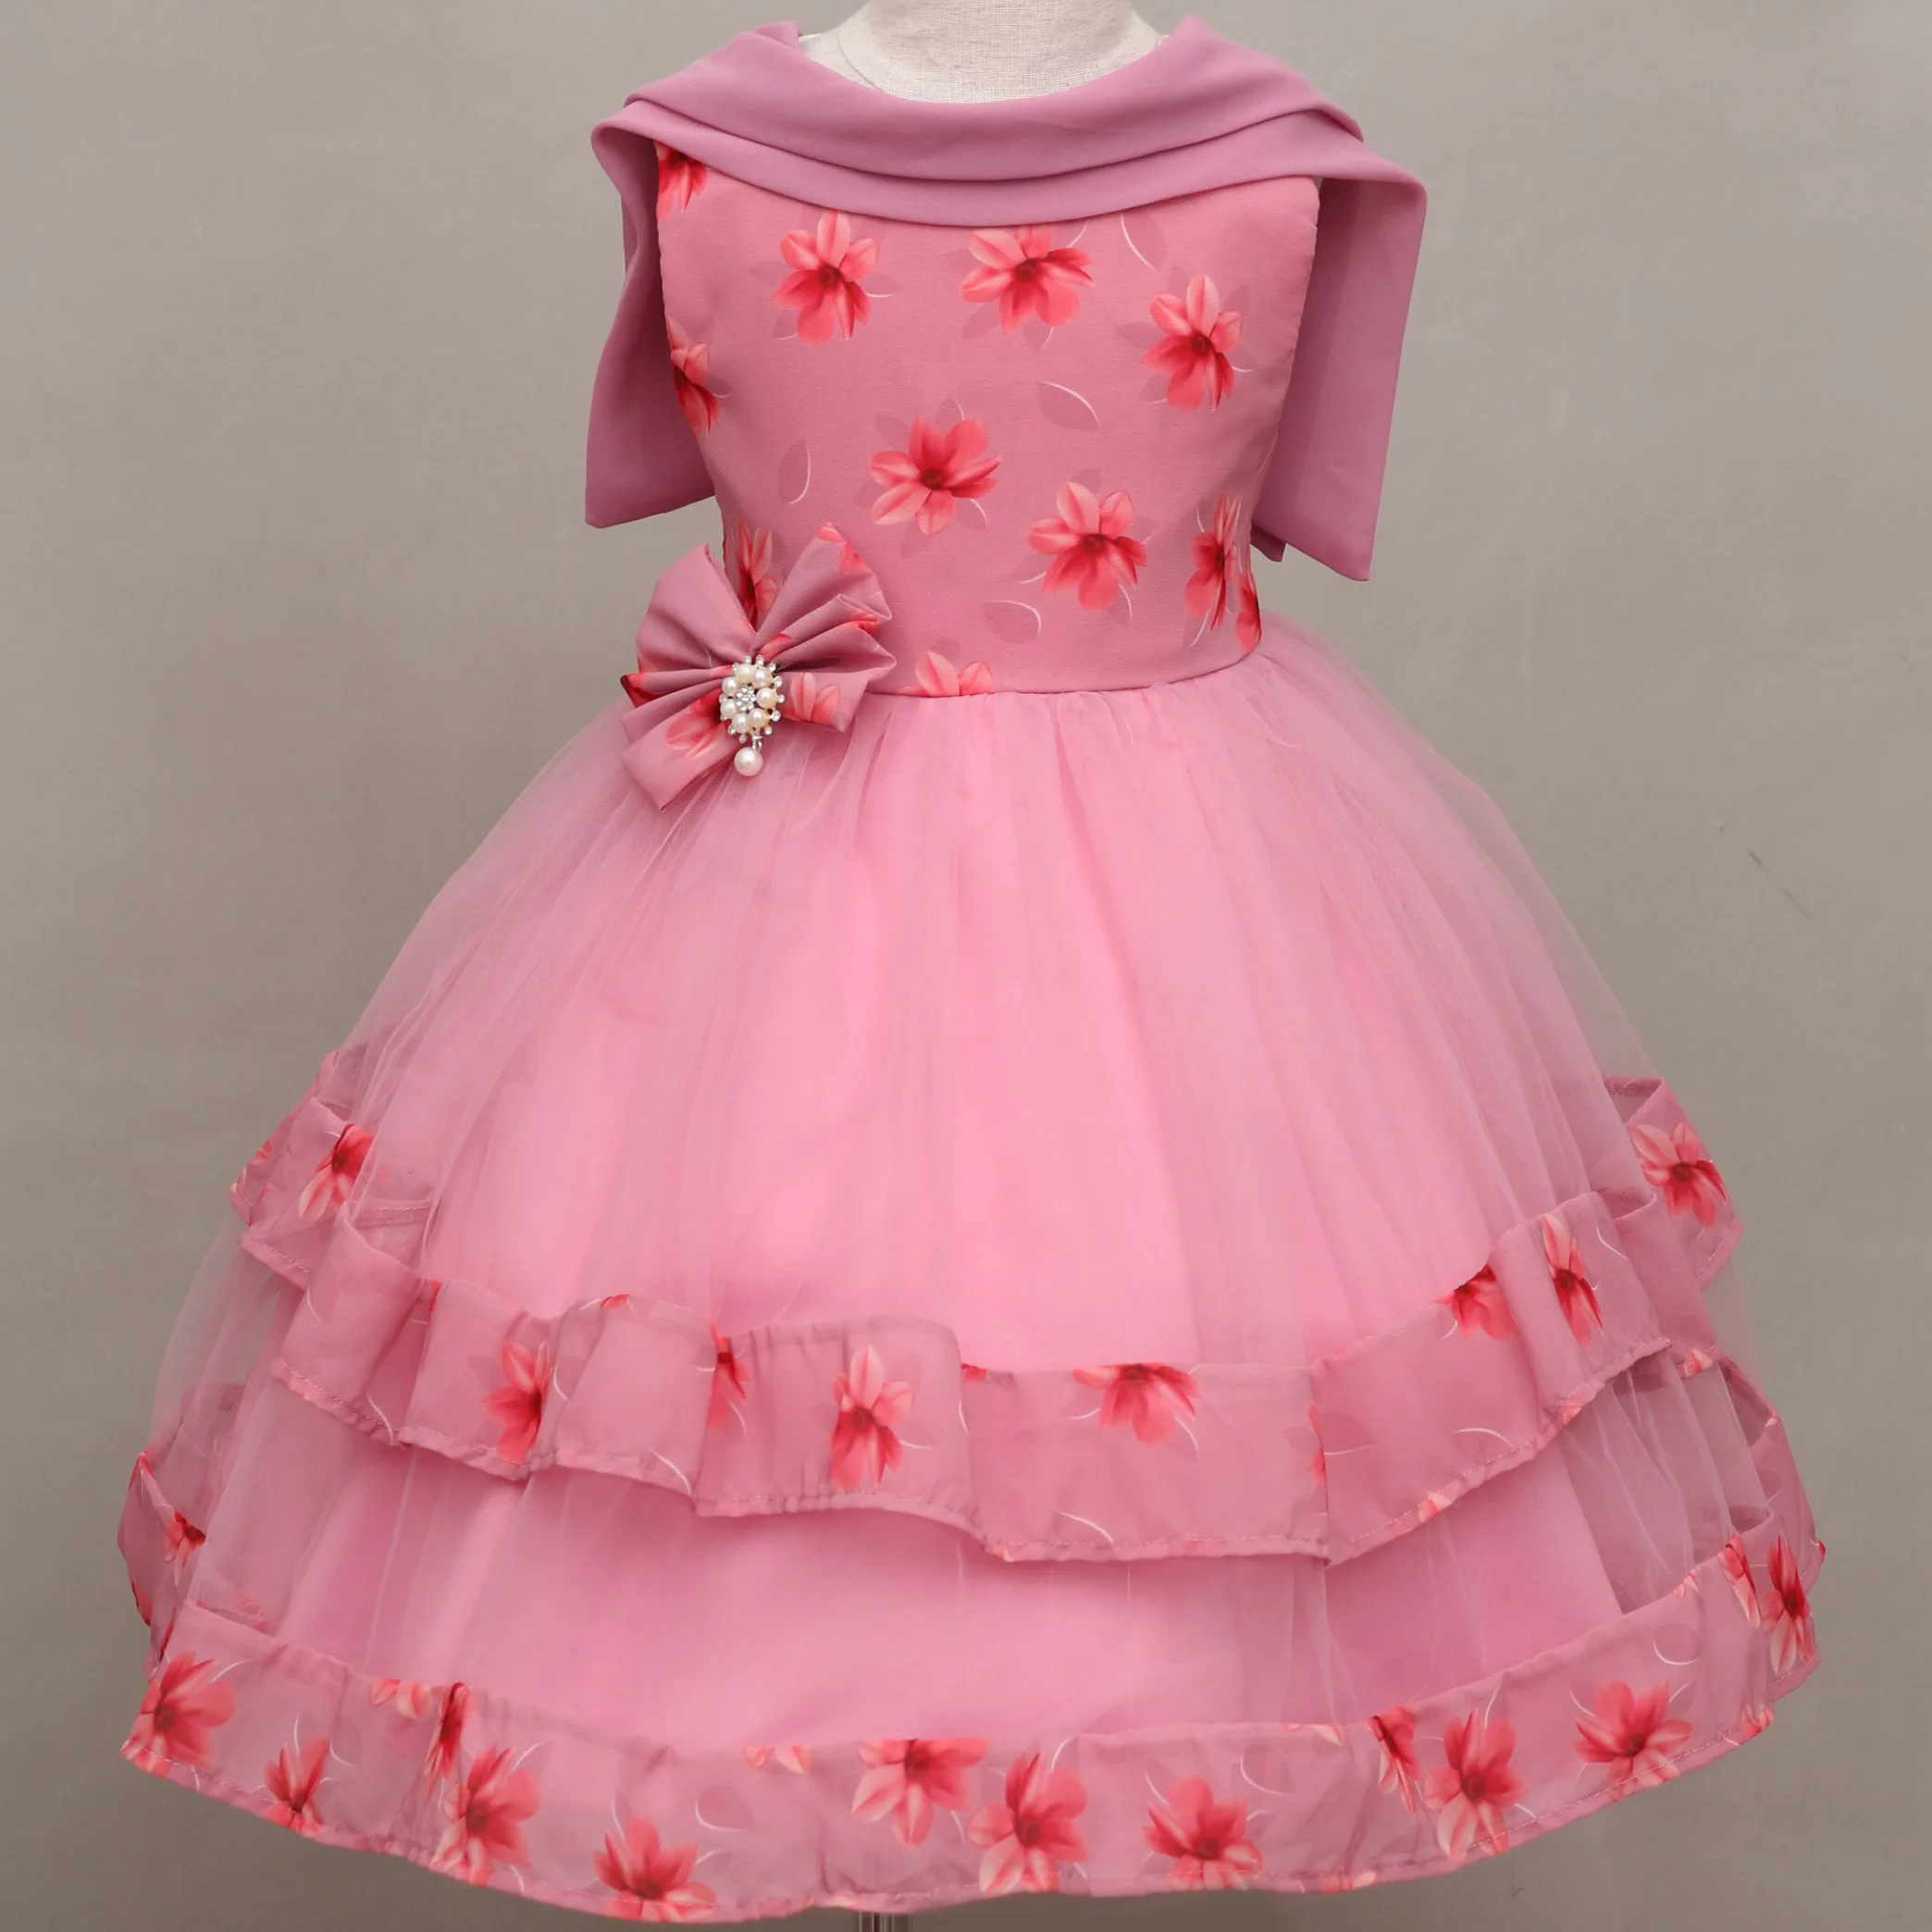 MChoice Girls Dresses Sundress Nail Bead Dress Wedding Party Dresses 34  Years Old Hot Pink  Amazonin Clothing  Accessories